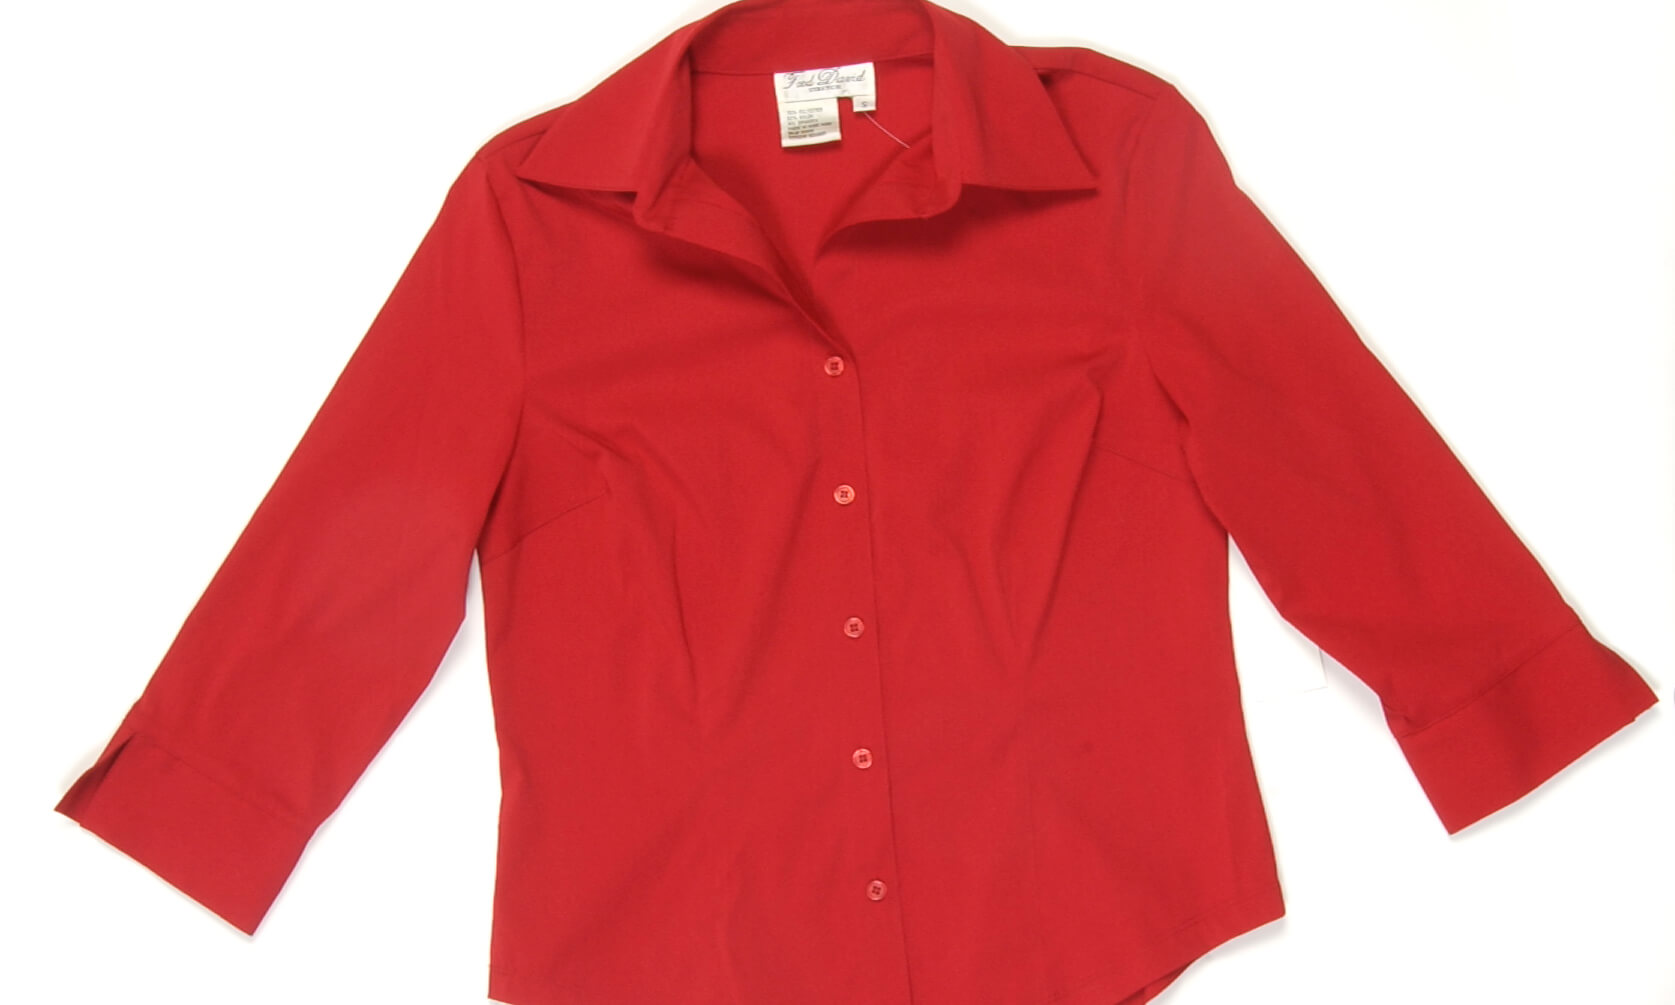 photo of a red shirt